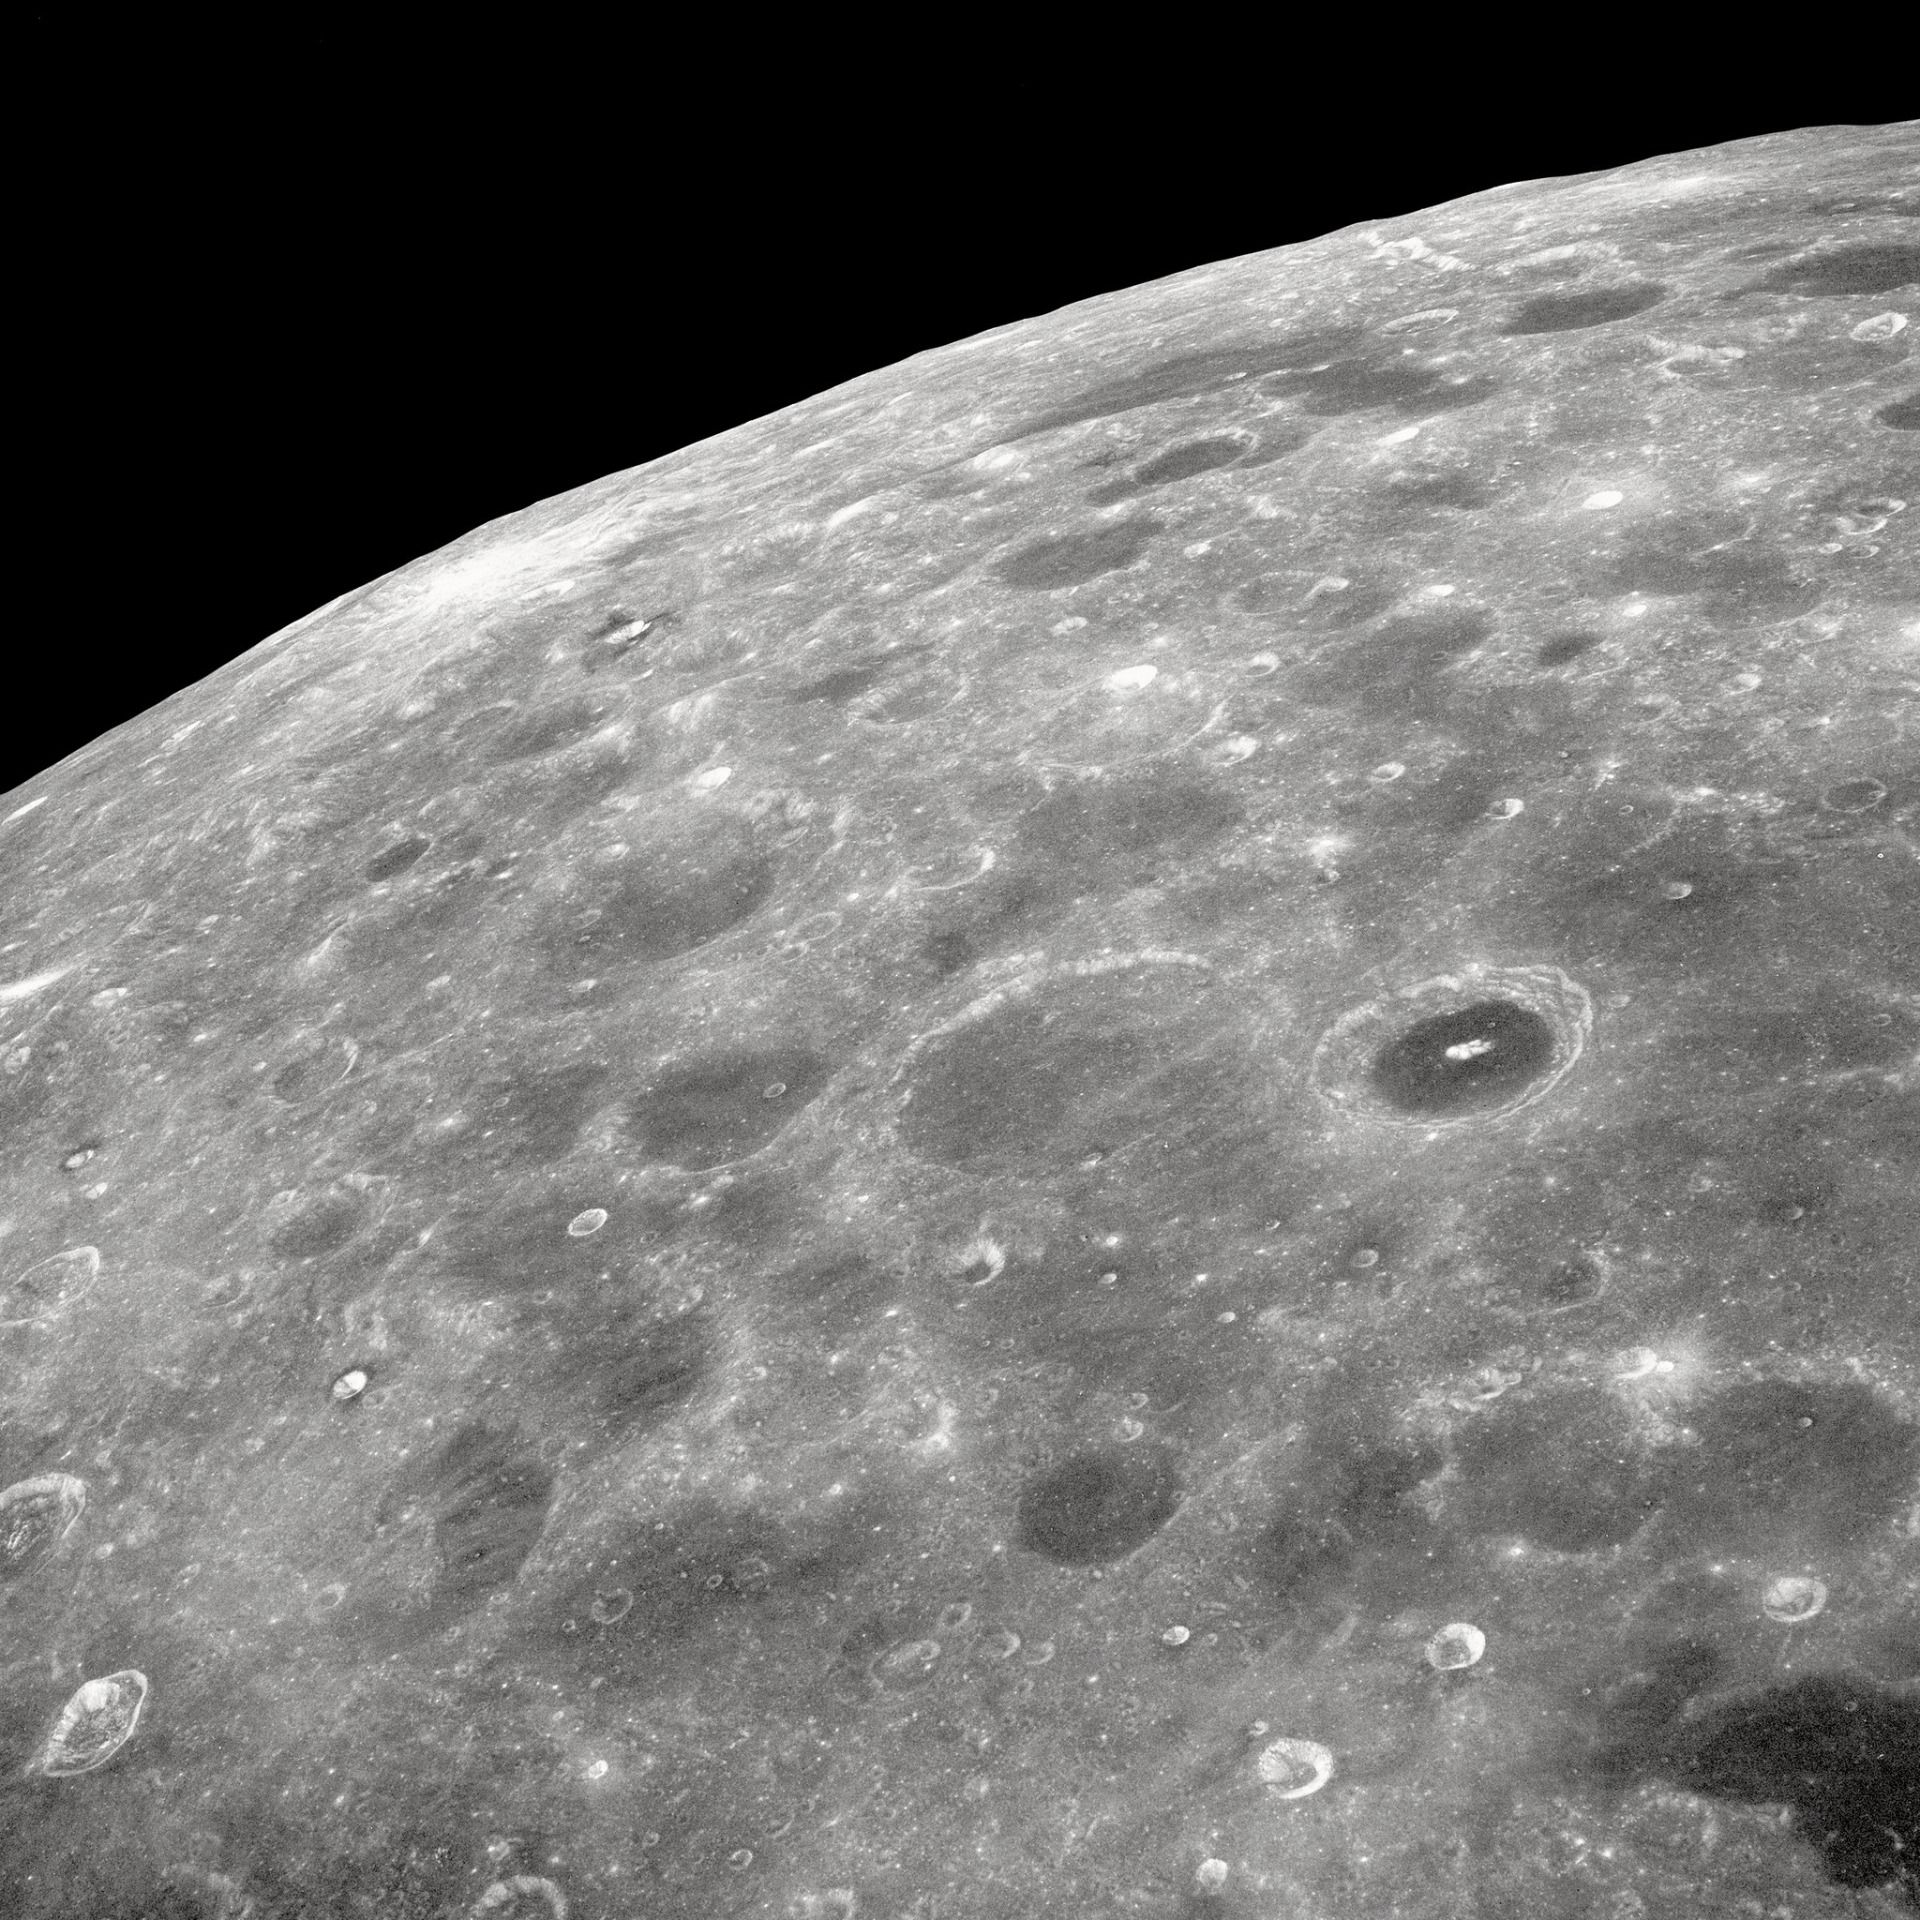 The surface of the moon from Apollo 8